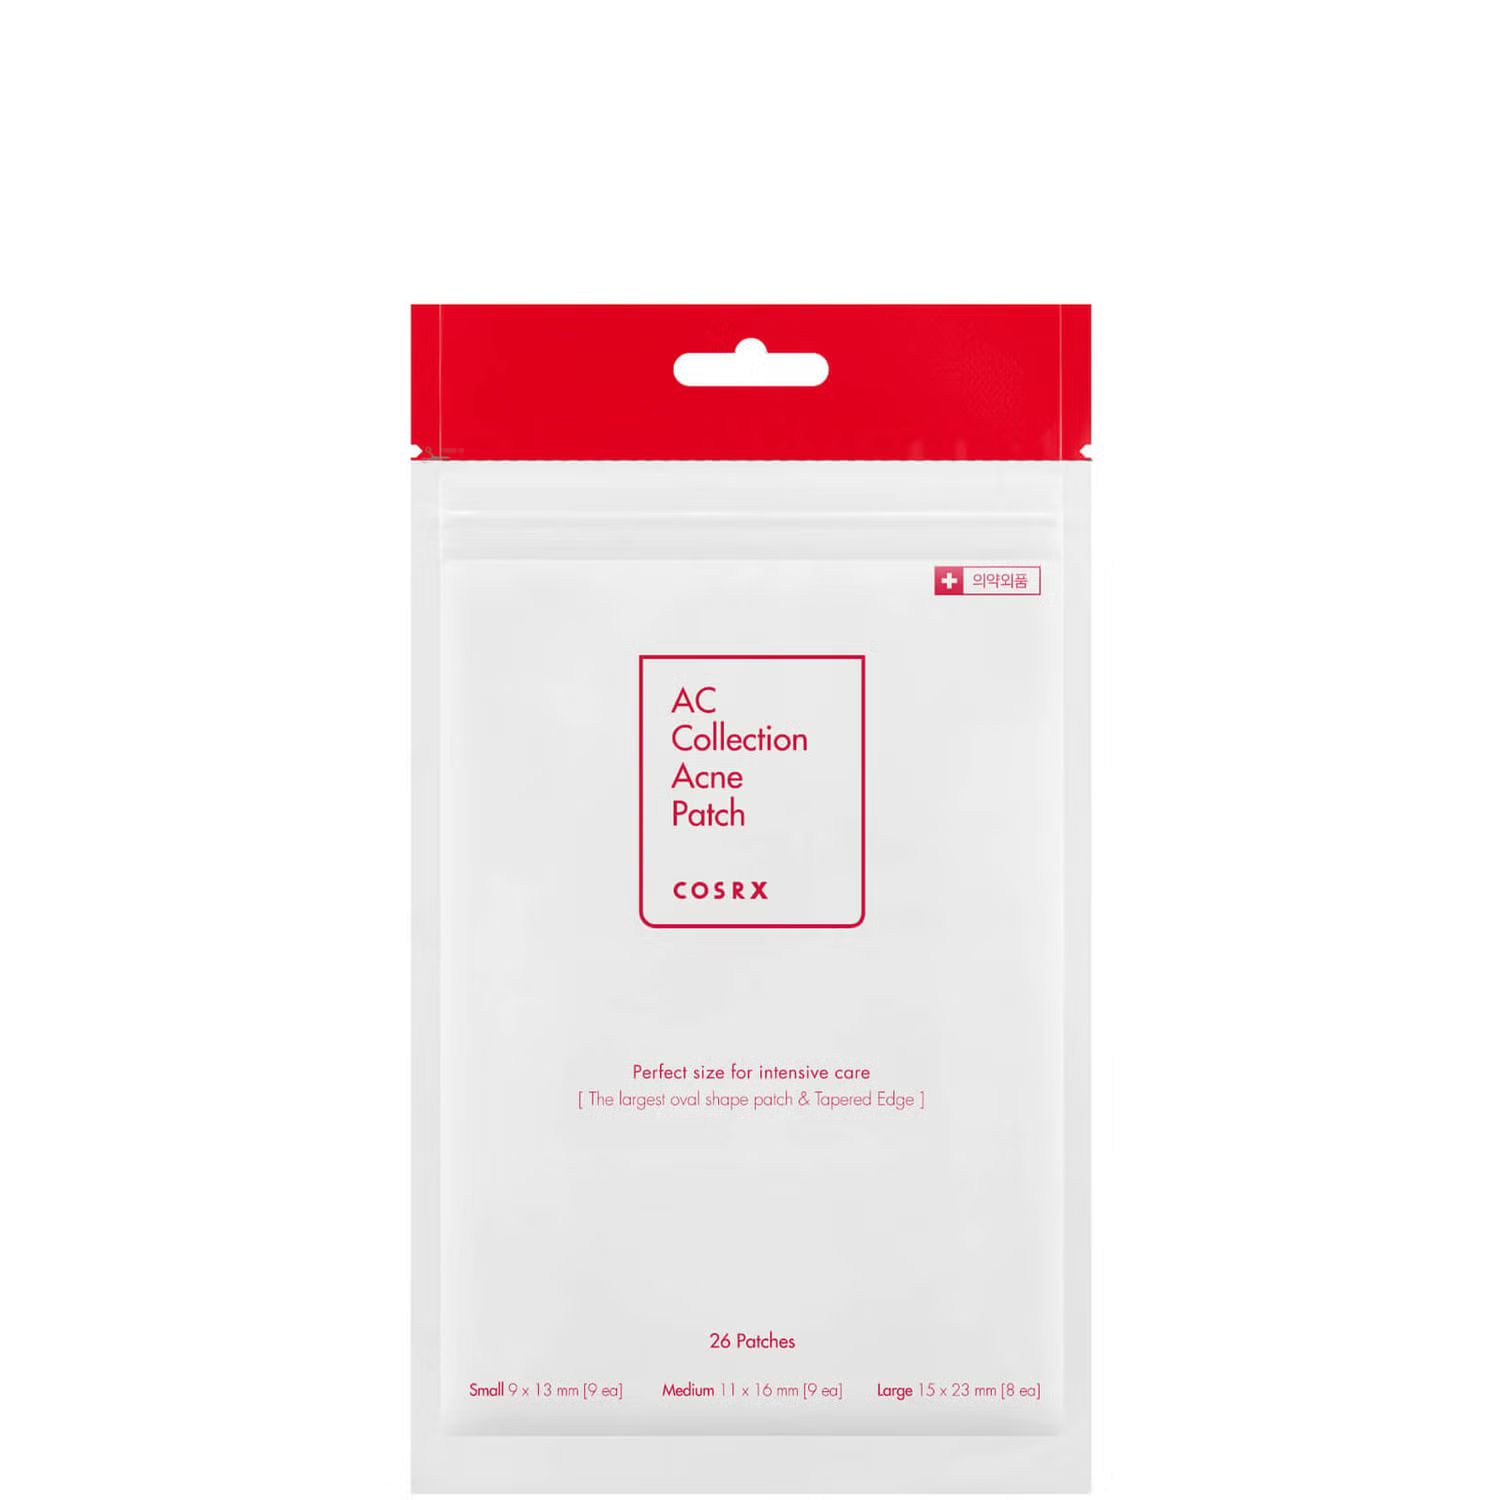 COSRX AC Collection Acne Patch (26 Patches) | Look Fantastic (UK)